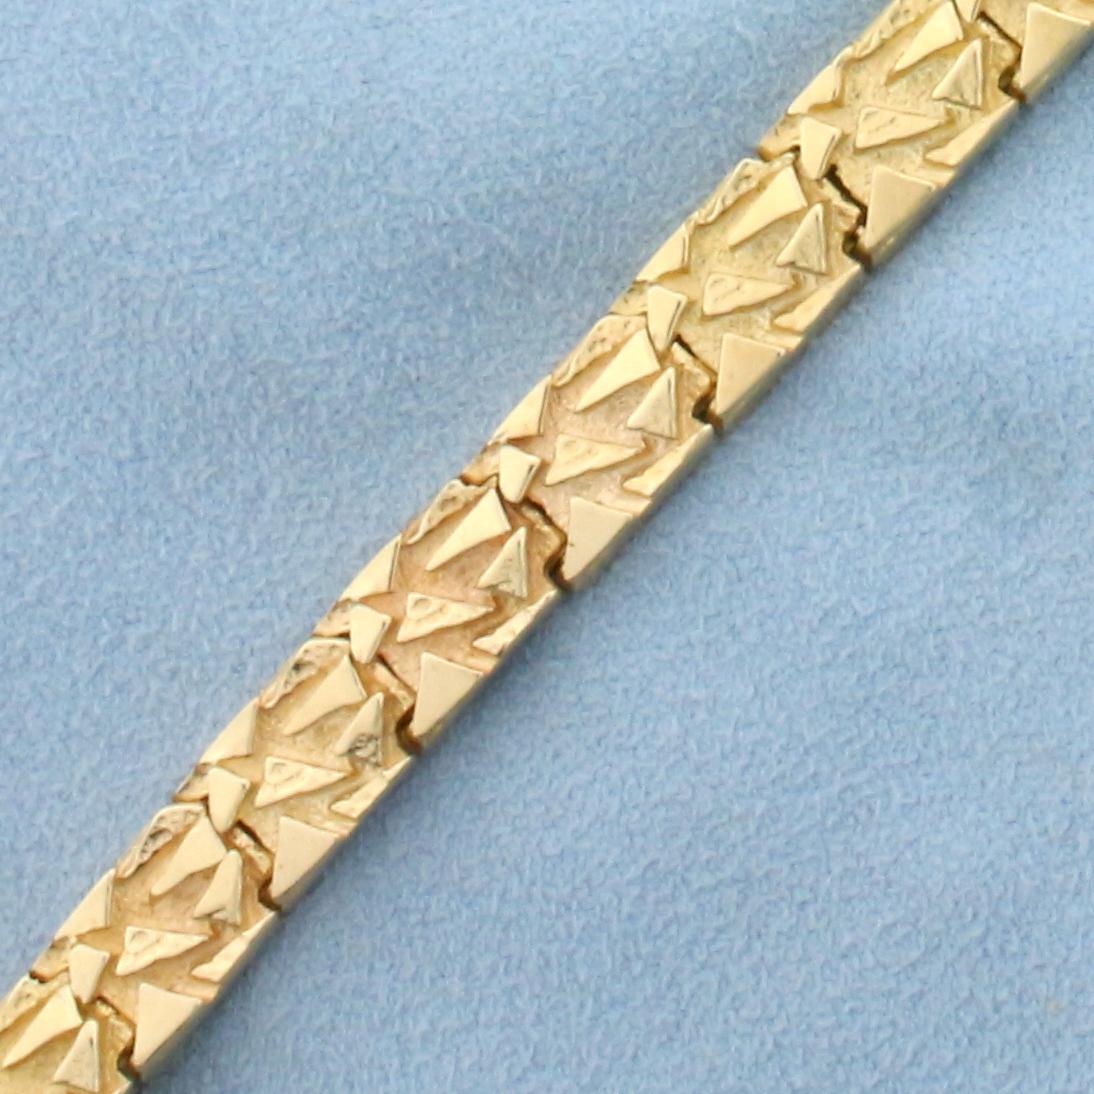 Nugget Style Abstract Design Bracelet In 14k Yellow Gold